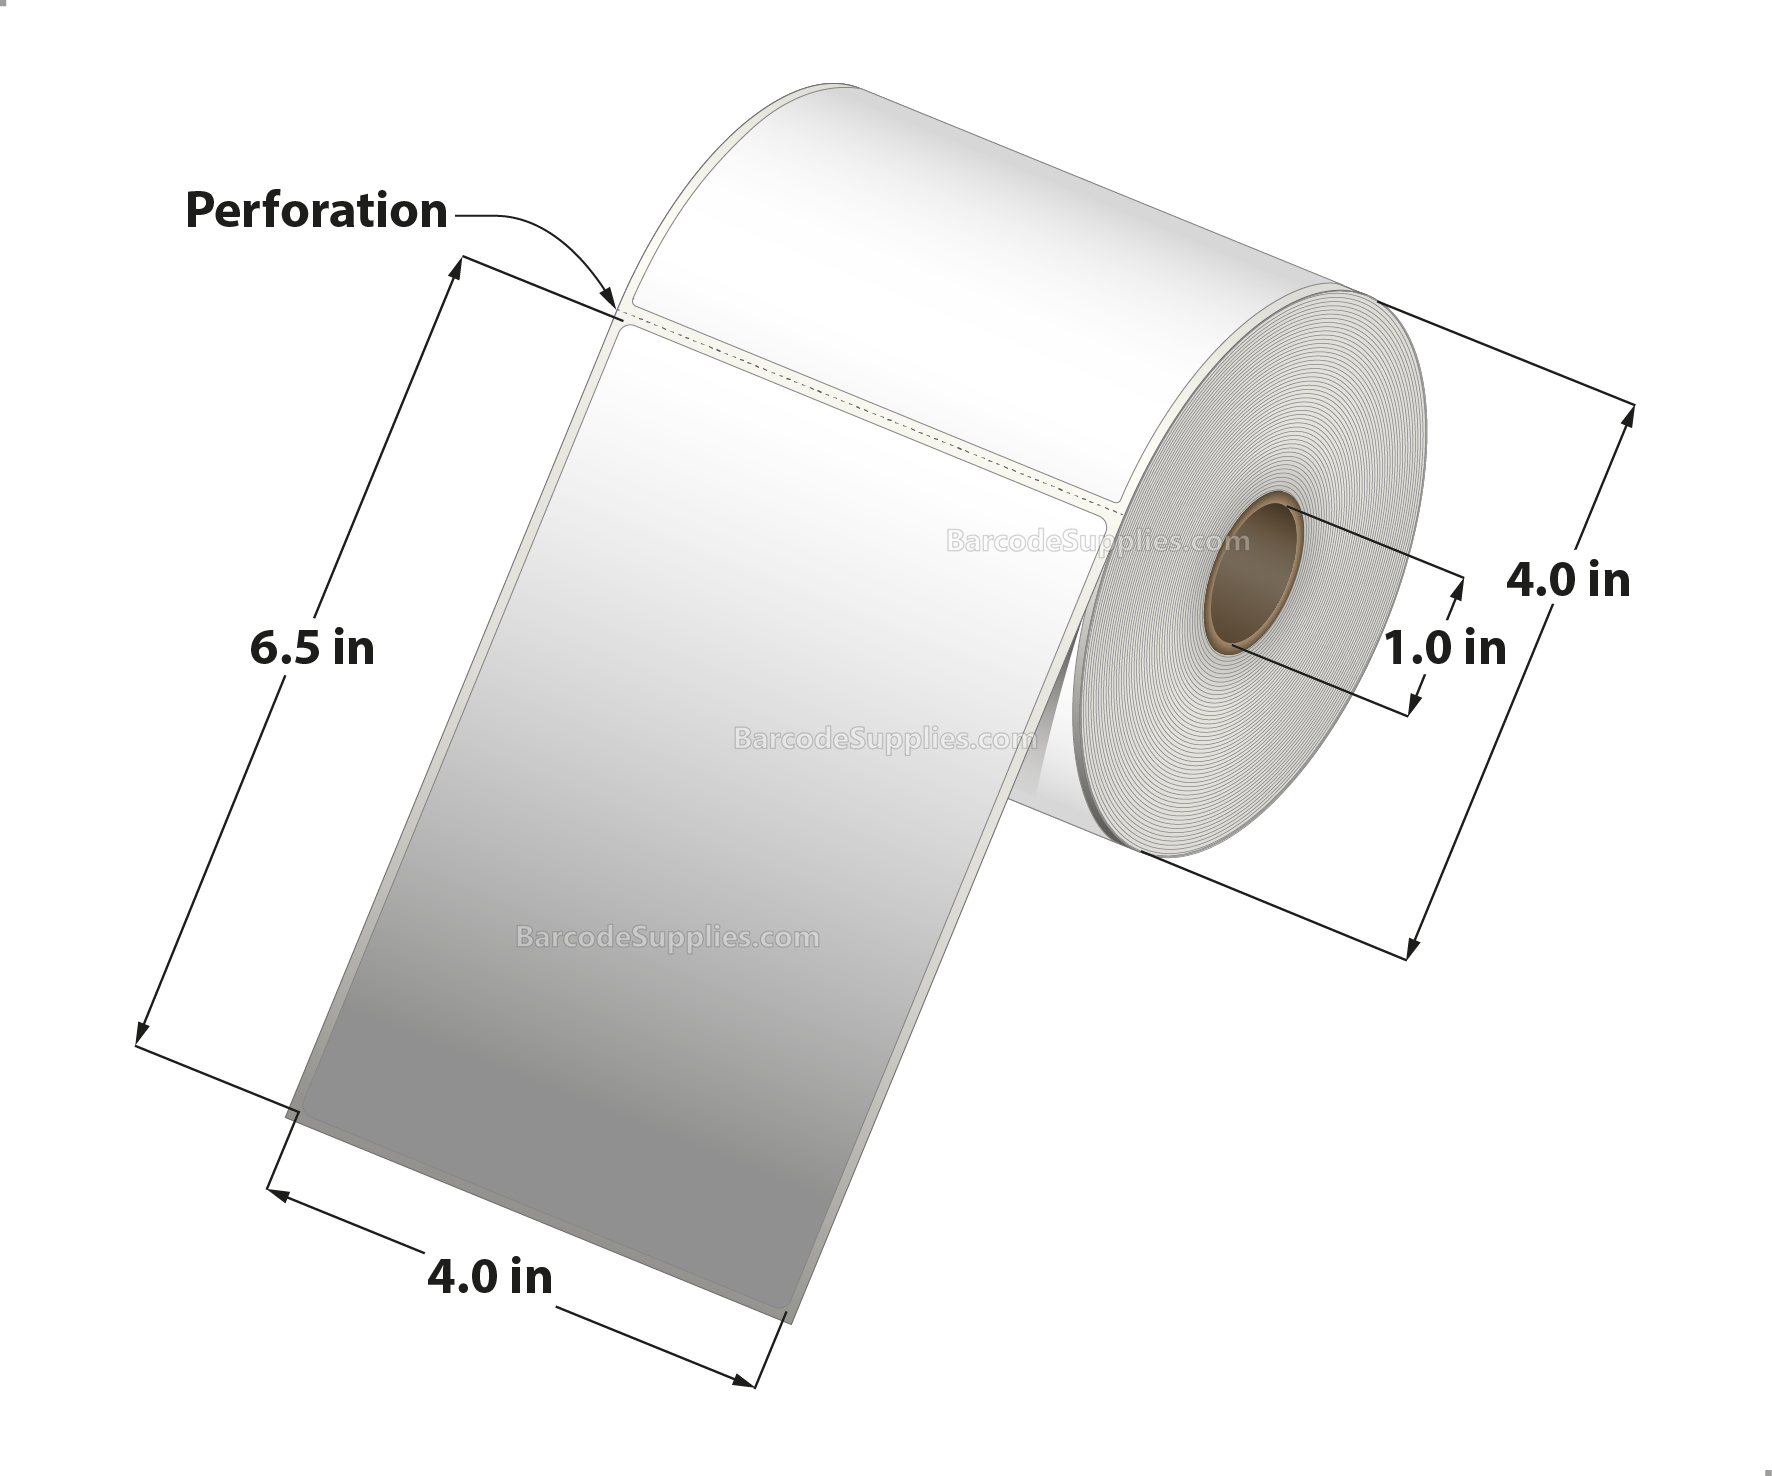 Products 4 x 6.5 Thermal Transfer White Labels With Rubber Adhesive - Perforated - 230 Labels Per Roll - Carton Of 12 Rolls - 2760 Labels Total - MPN: RTT4-400650-1P